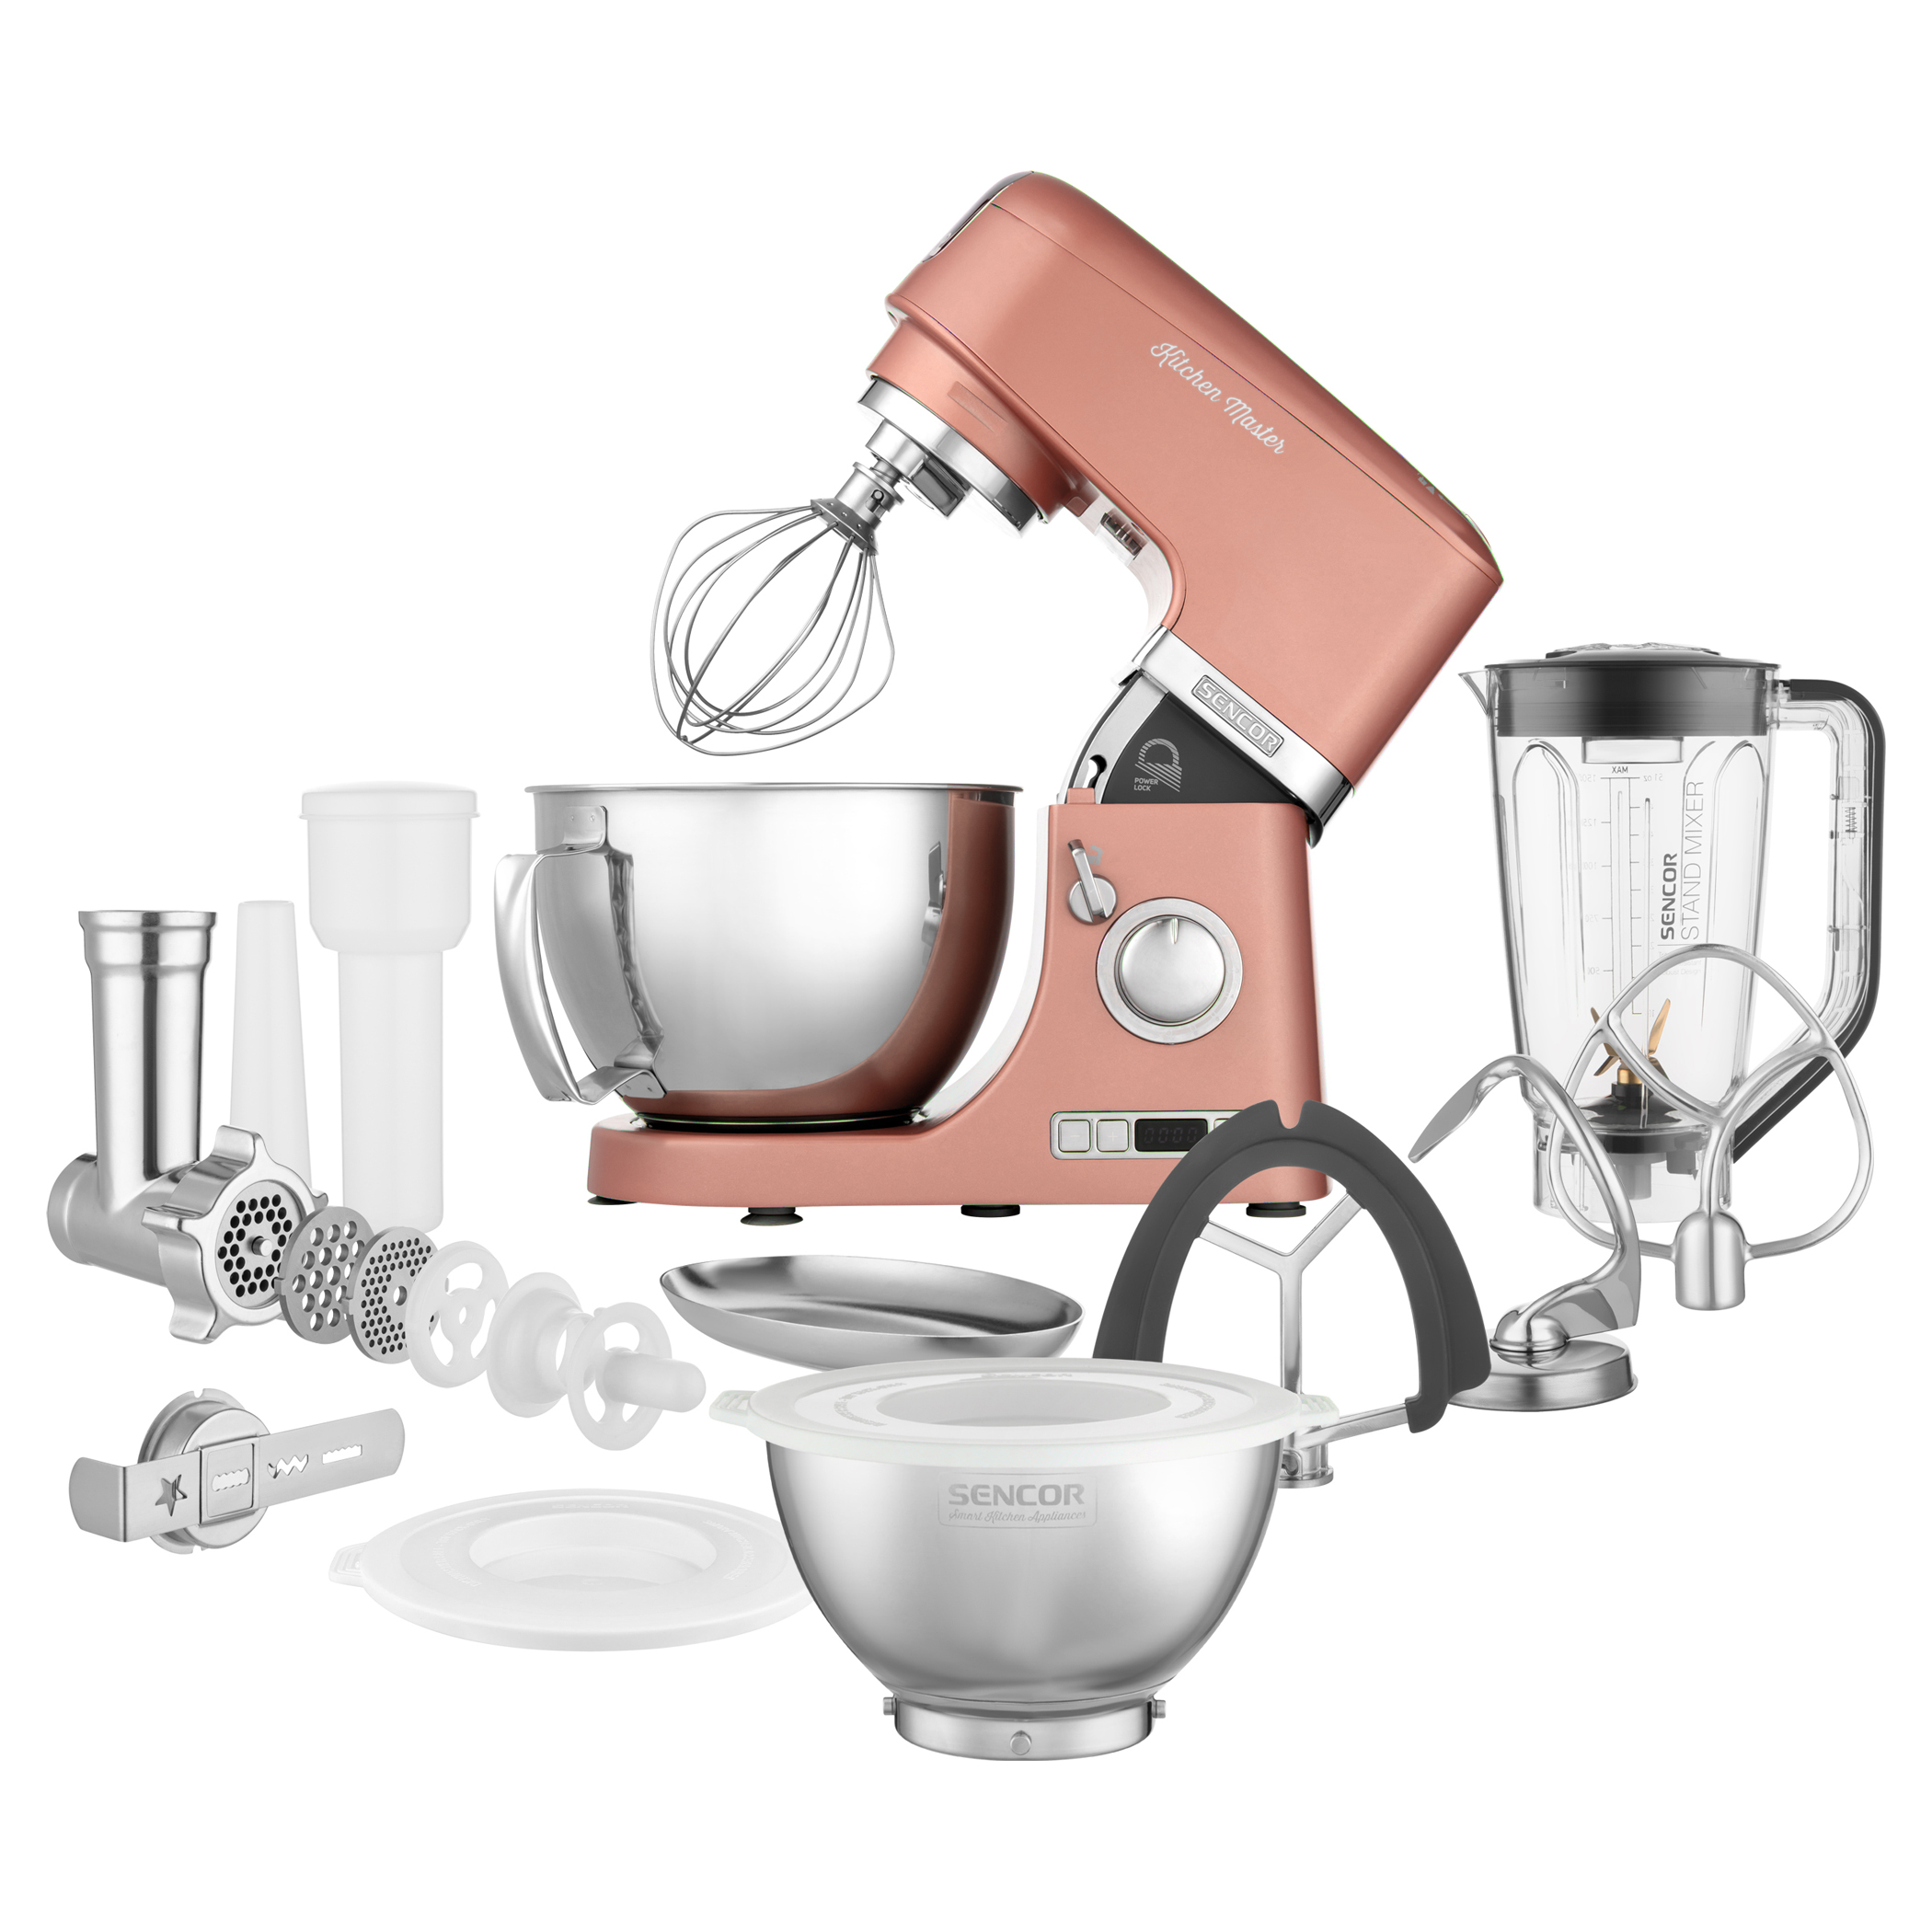 Will an American KitchenAid mixer work in Europe?